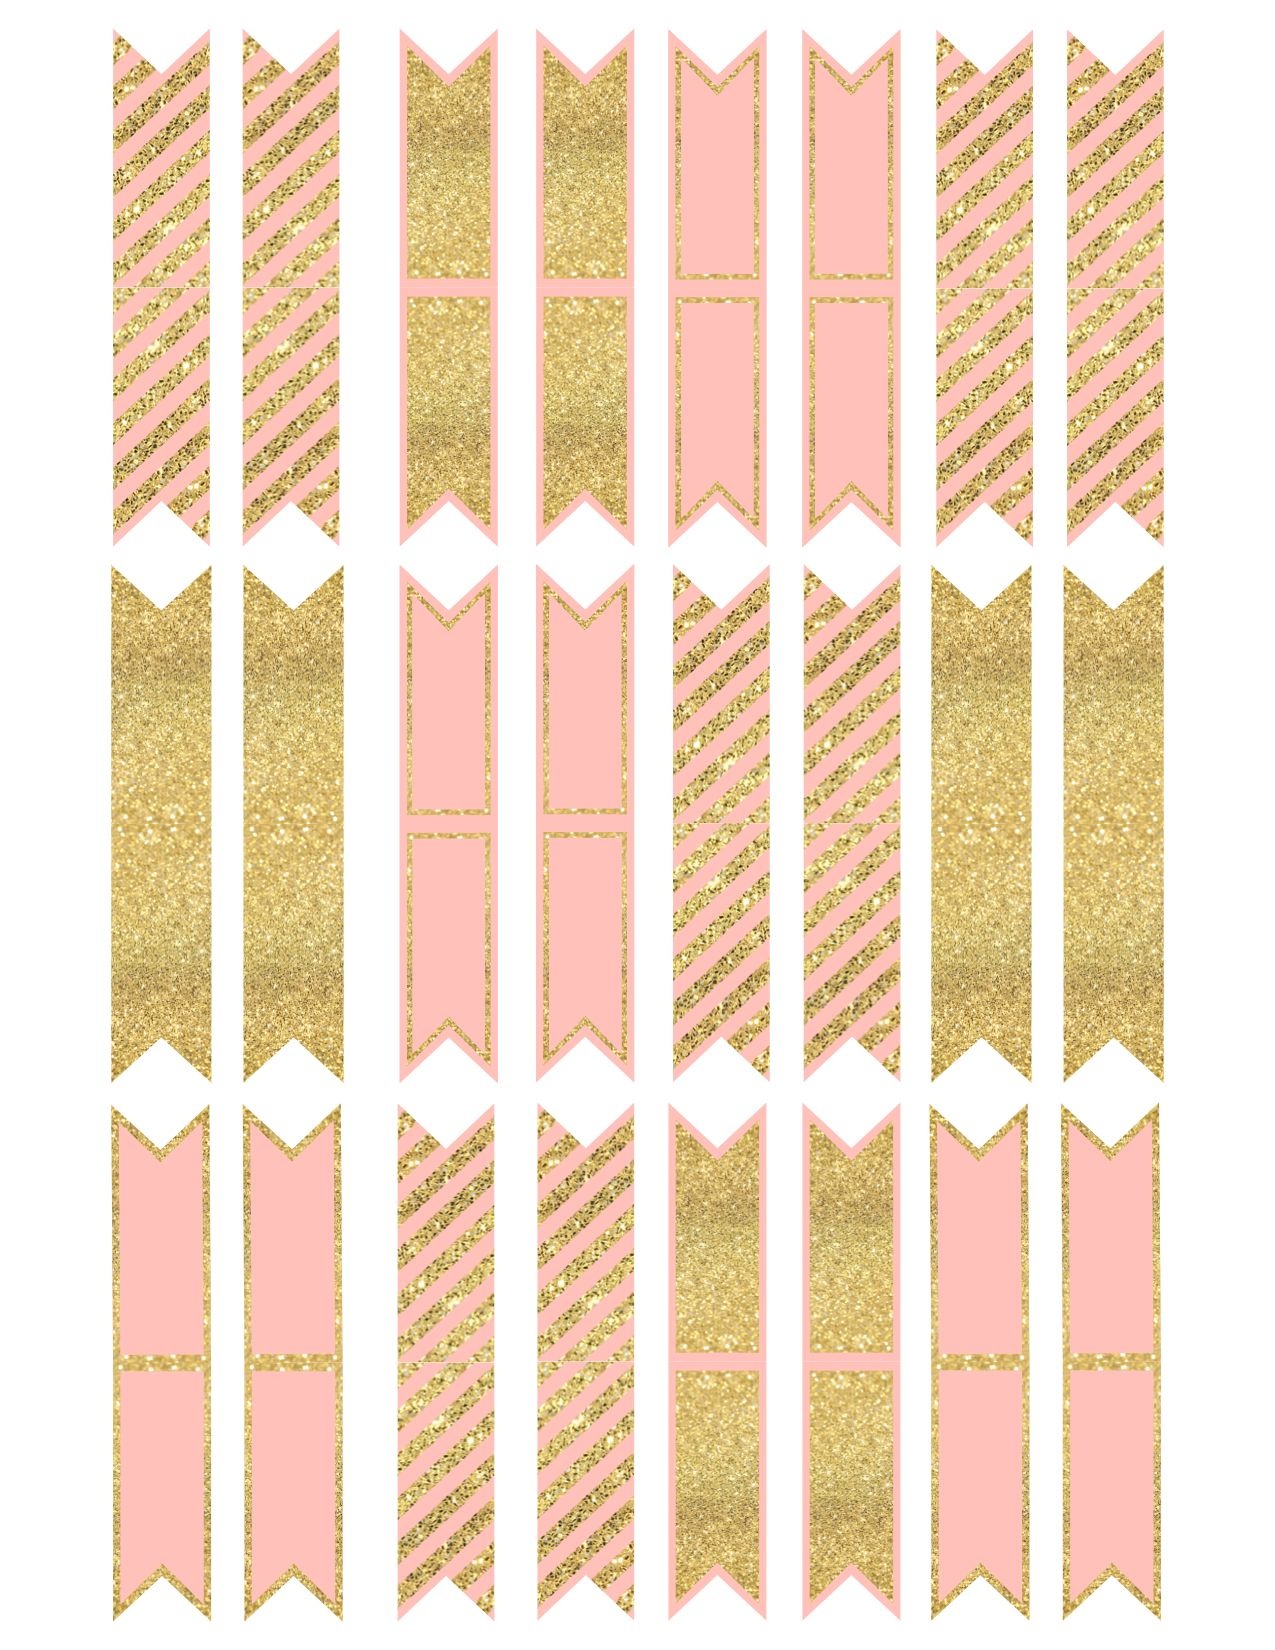 Pink And Gold Cupcake Topper Flags Or Bunting | Arts And Crafts - Cupcake Flags Printable Free